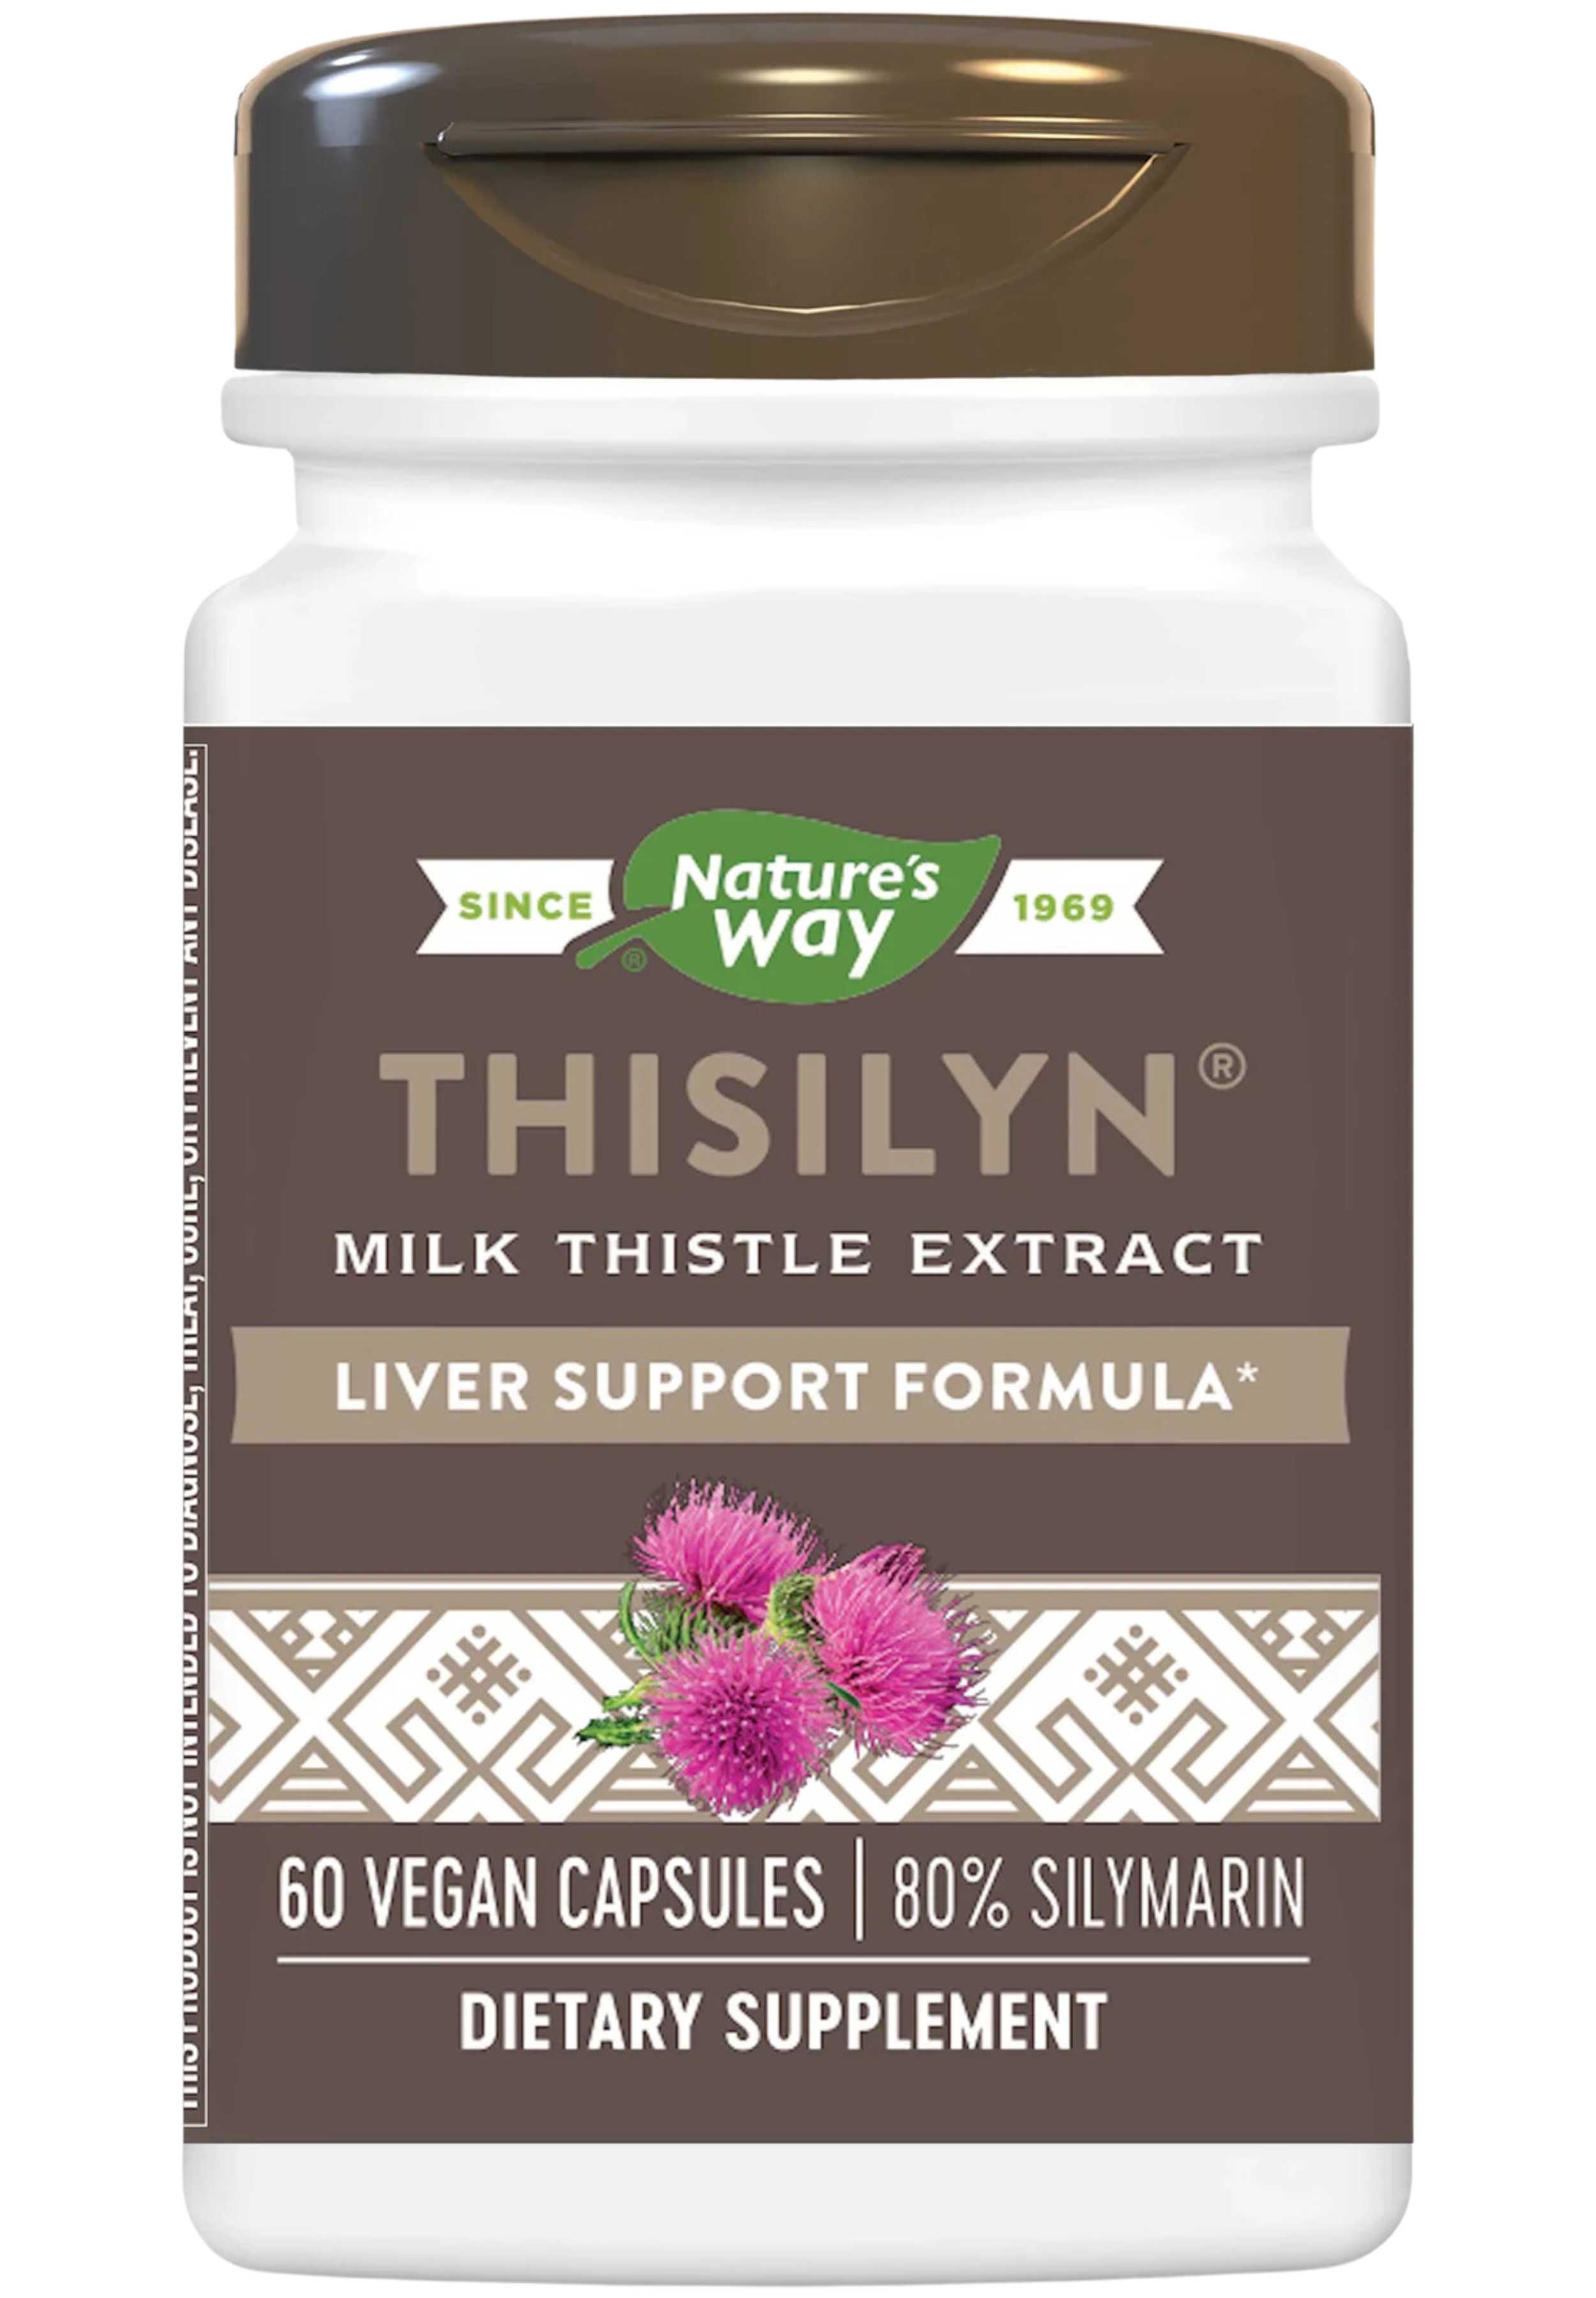 Nature's Way Thisilyn Milk Thistle Extract (Standardized)